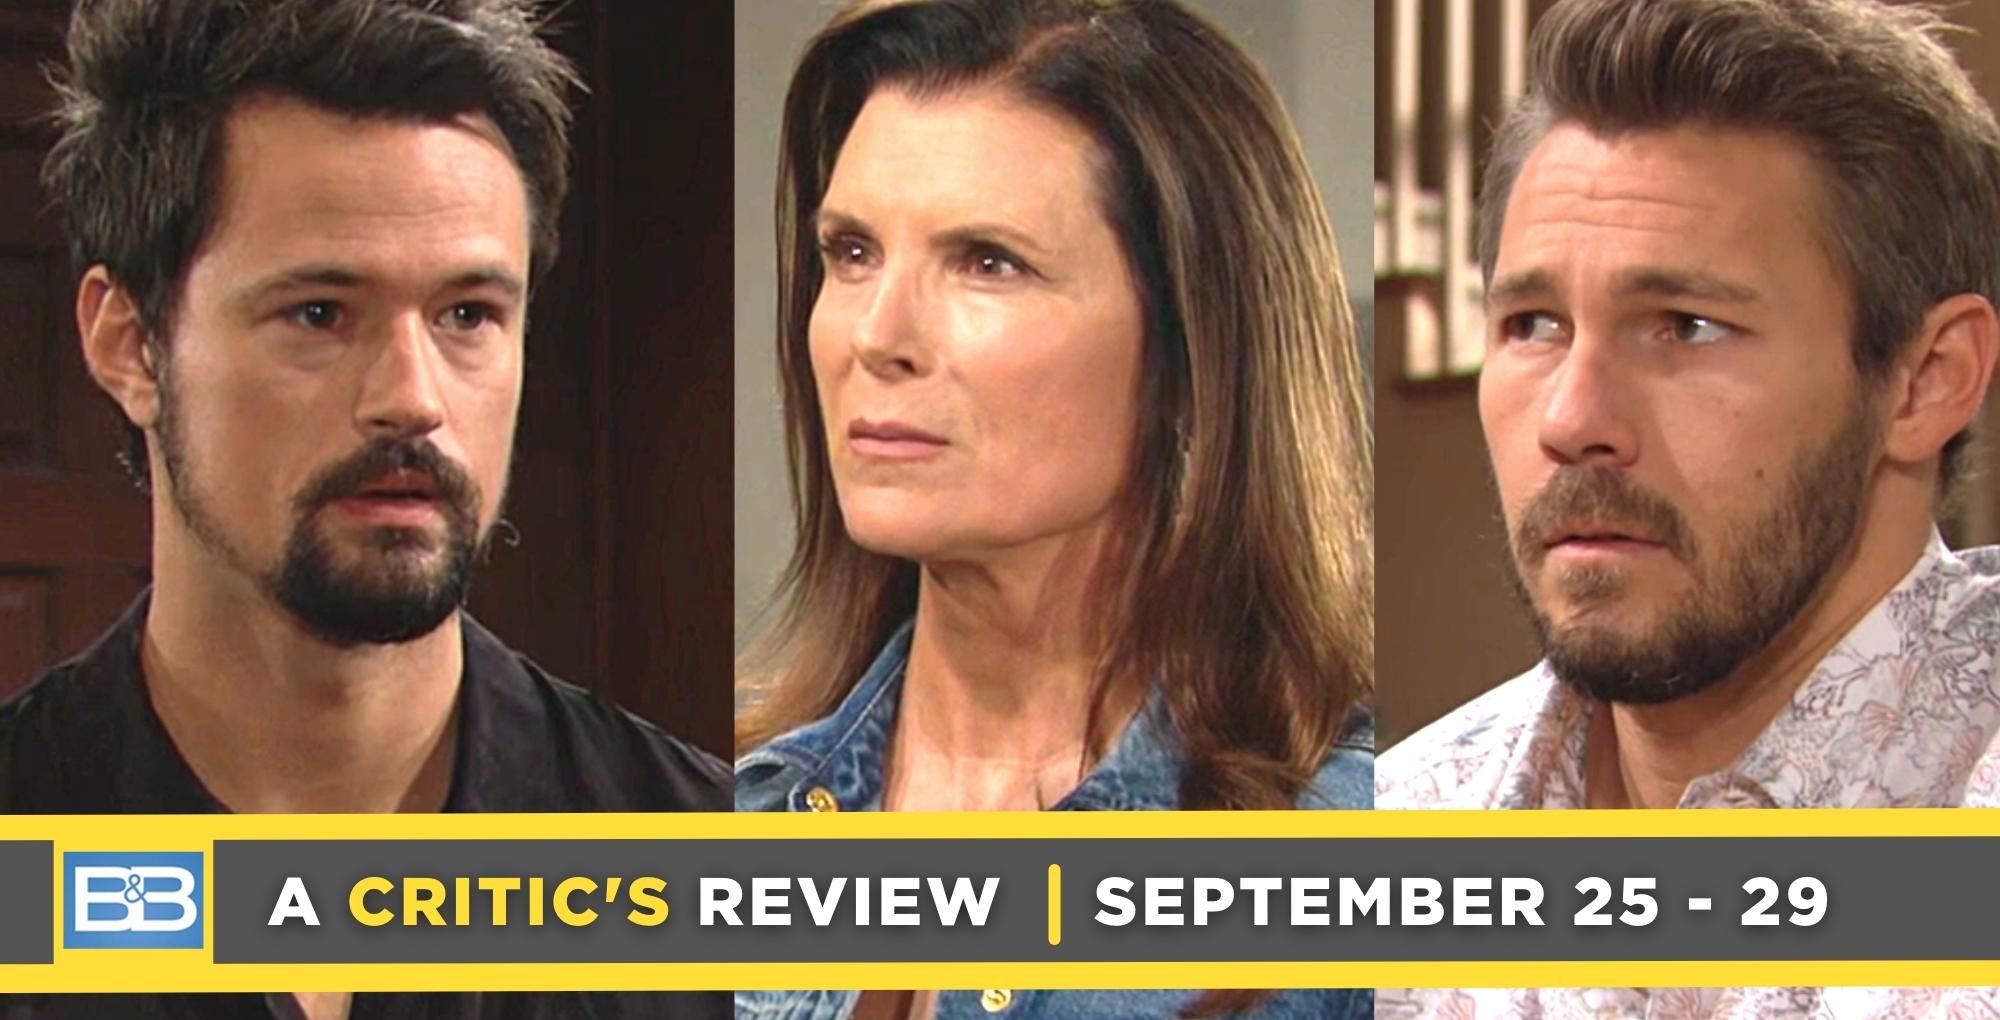 the bold and the beautiful critic's review for september 25 – september 29, 2023, three images, thomas, sheila, and liam.